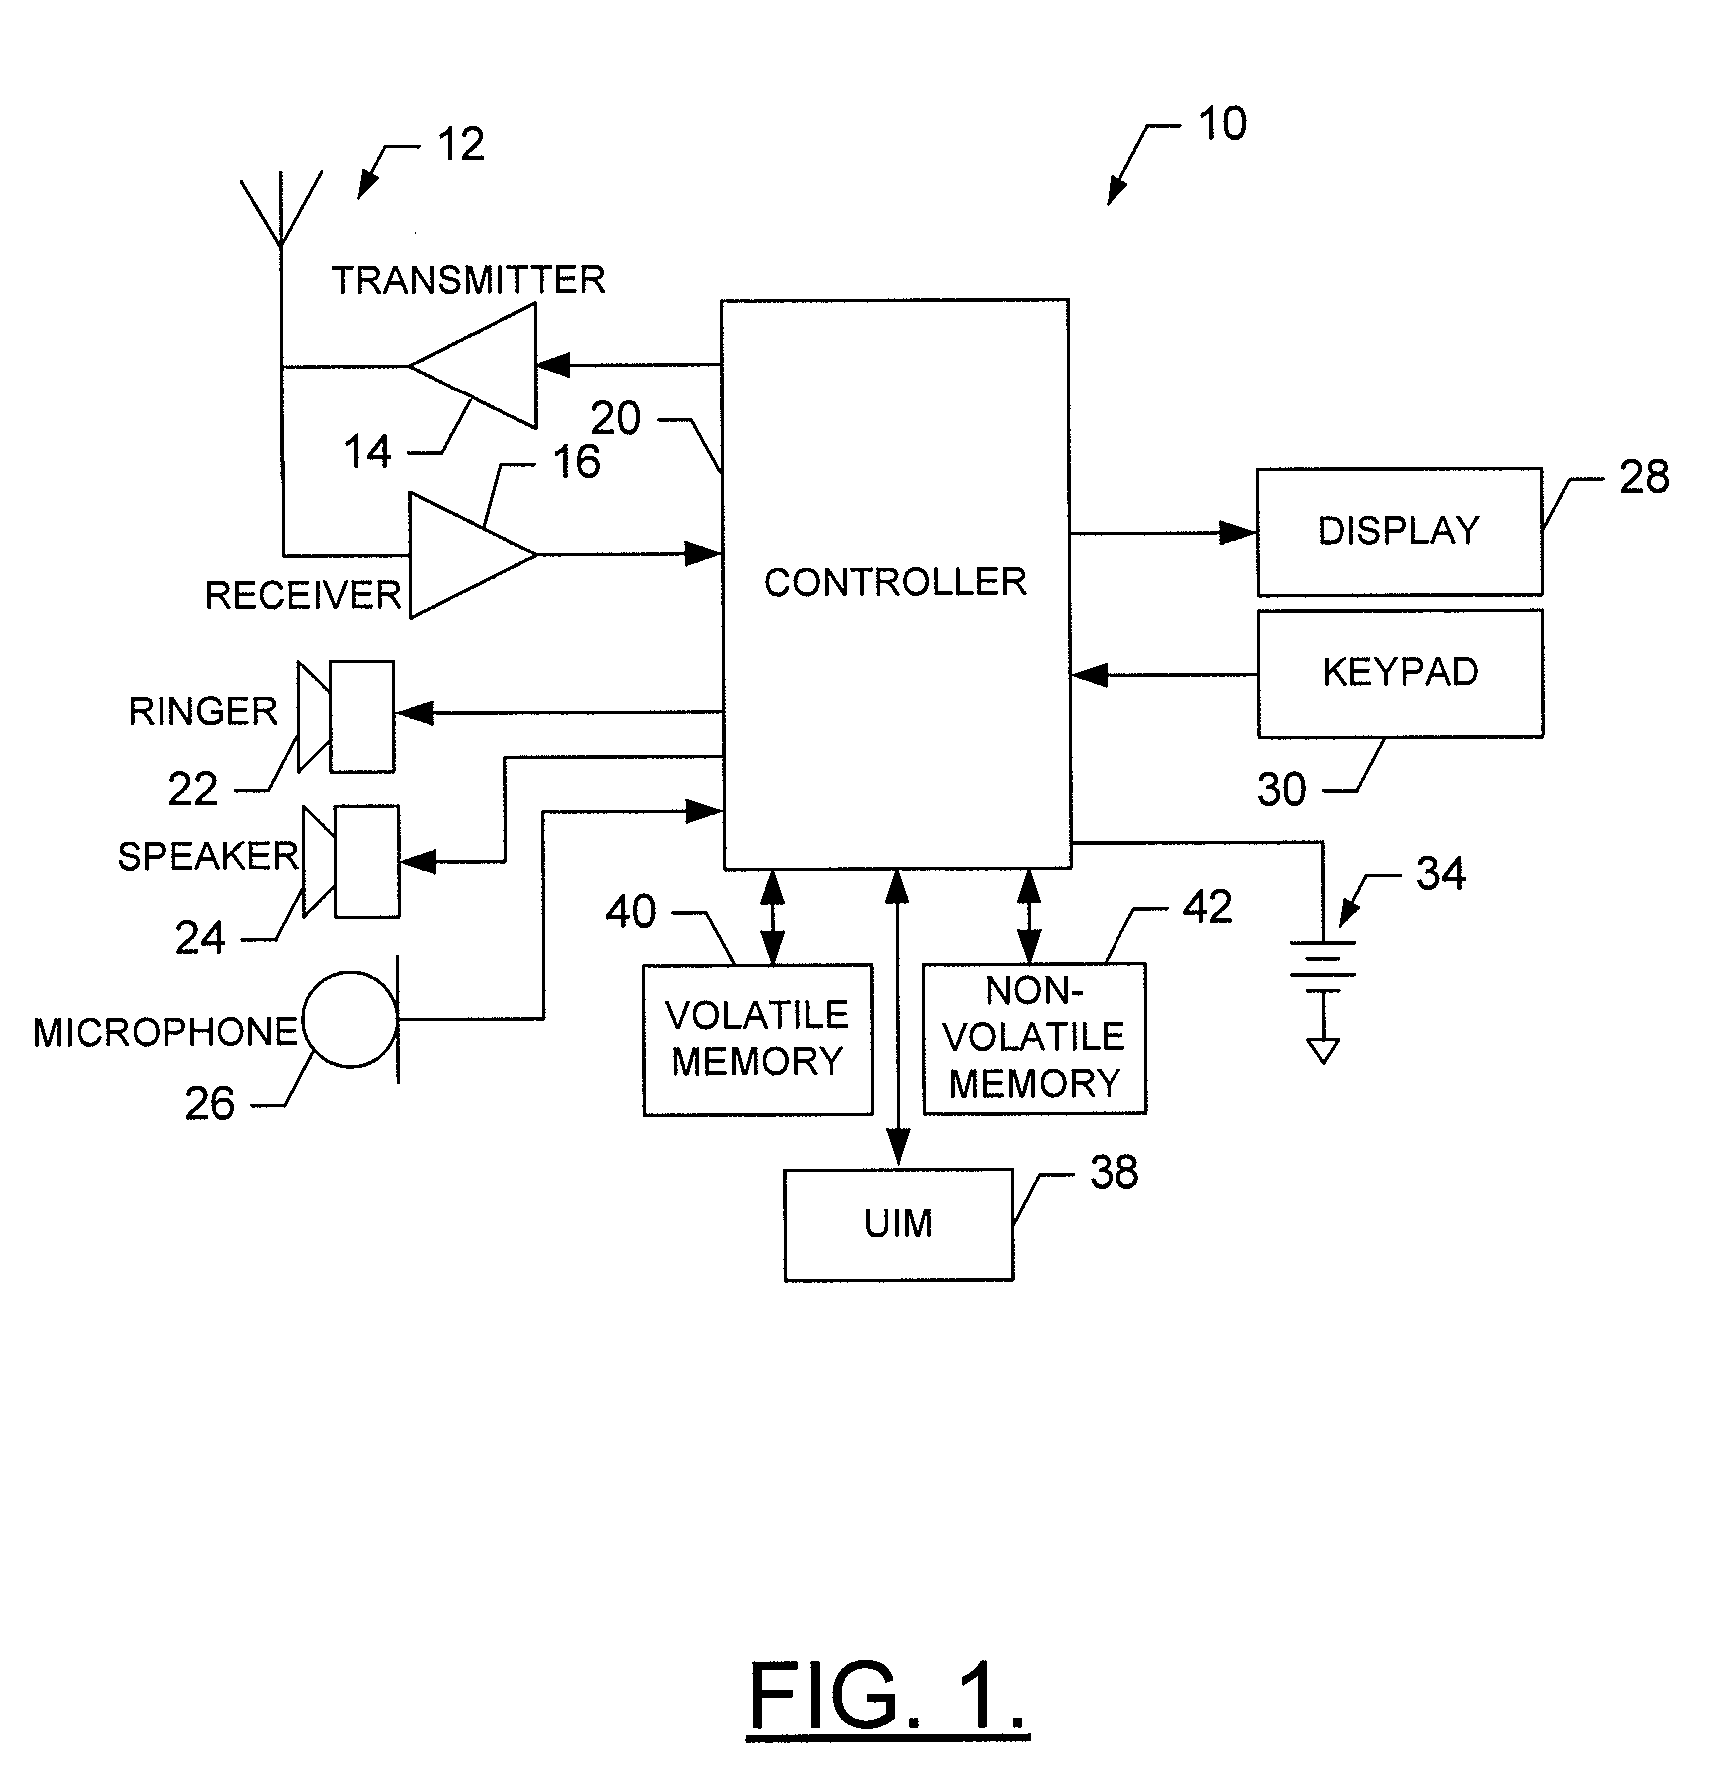 Method, Apparatus and Computer Program Product for Reducing Outage Probability for Mobile Devices